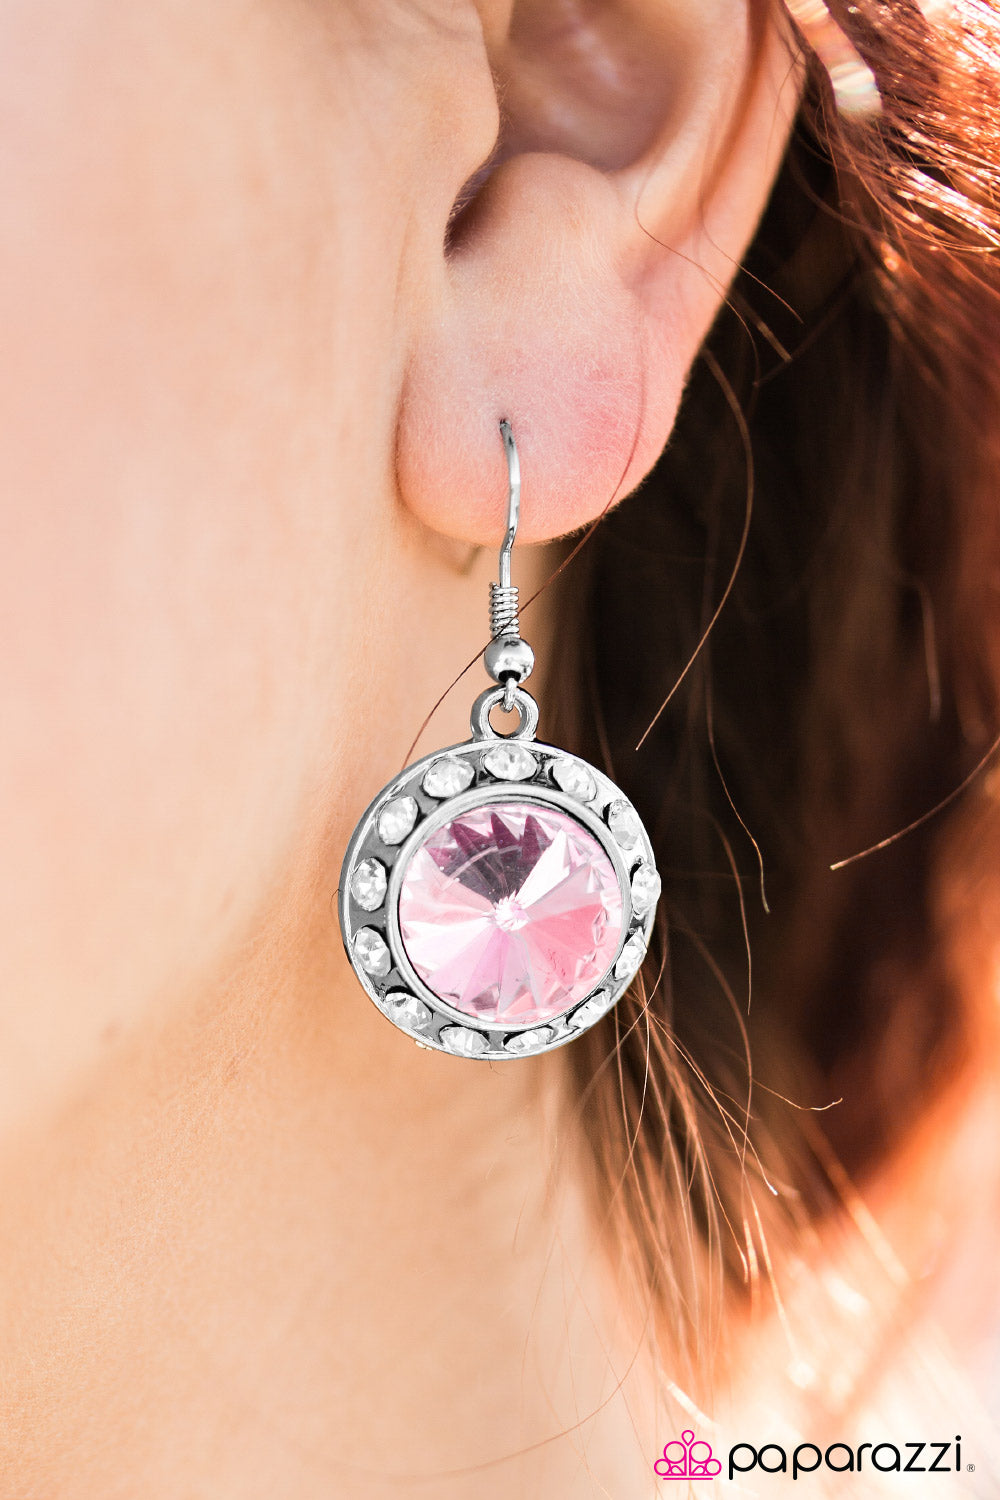 Turn on the Sparkle - Pink - Paparazzi earrings